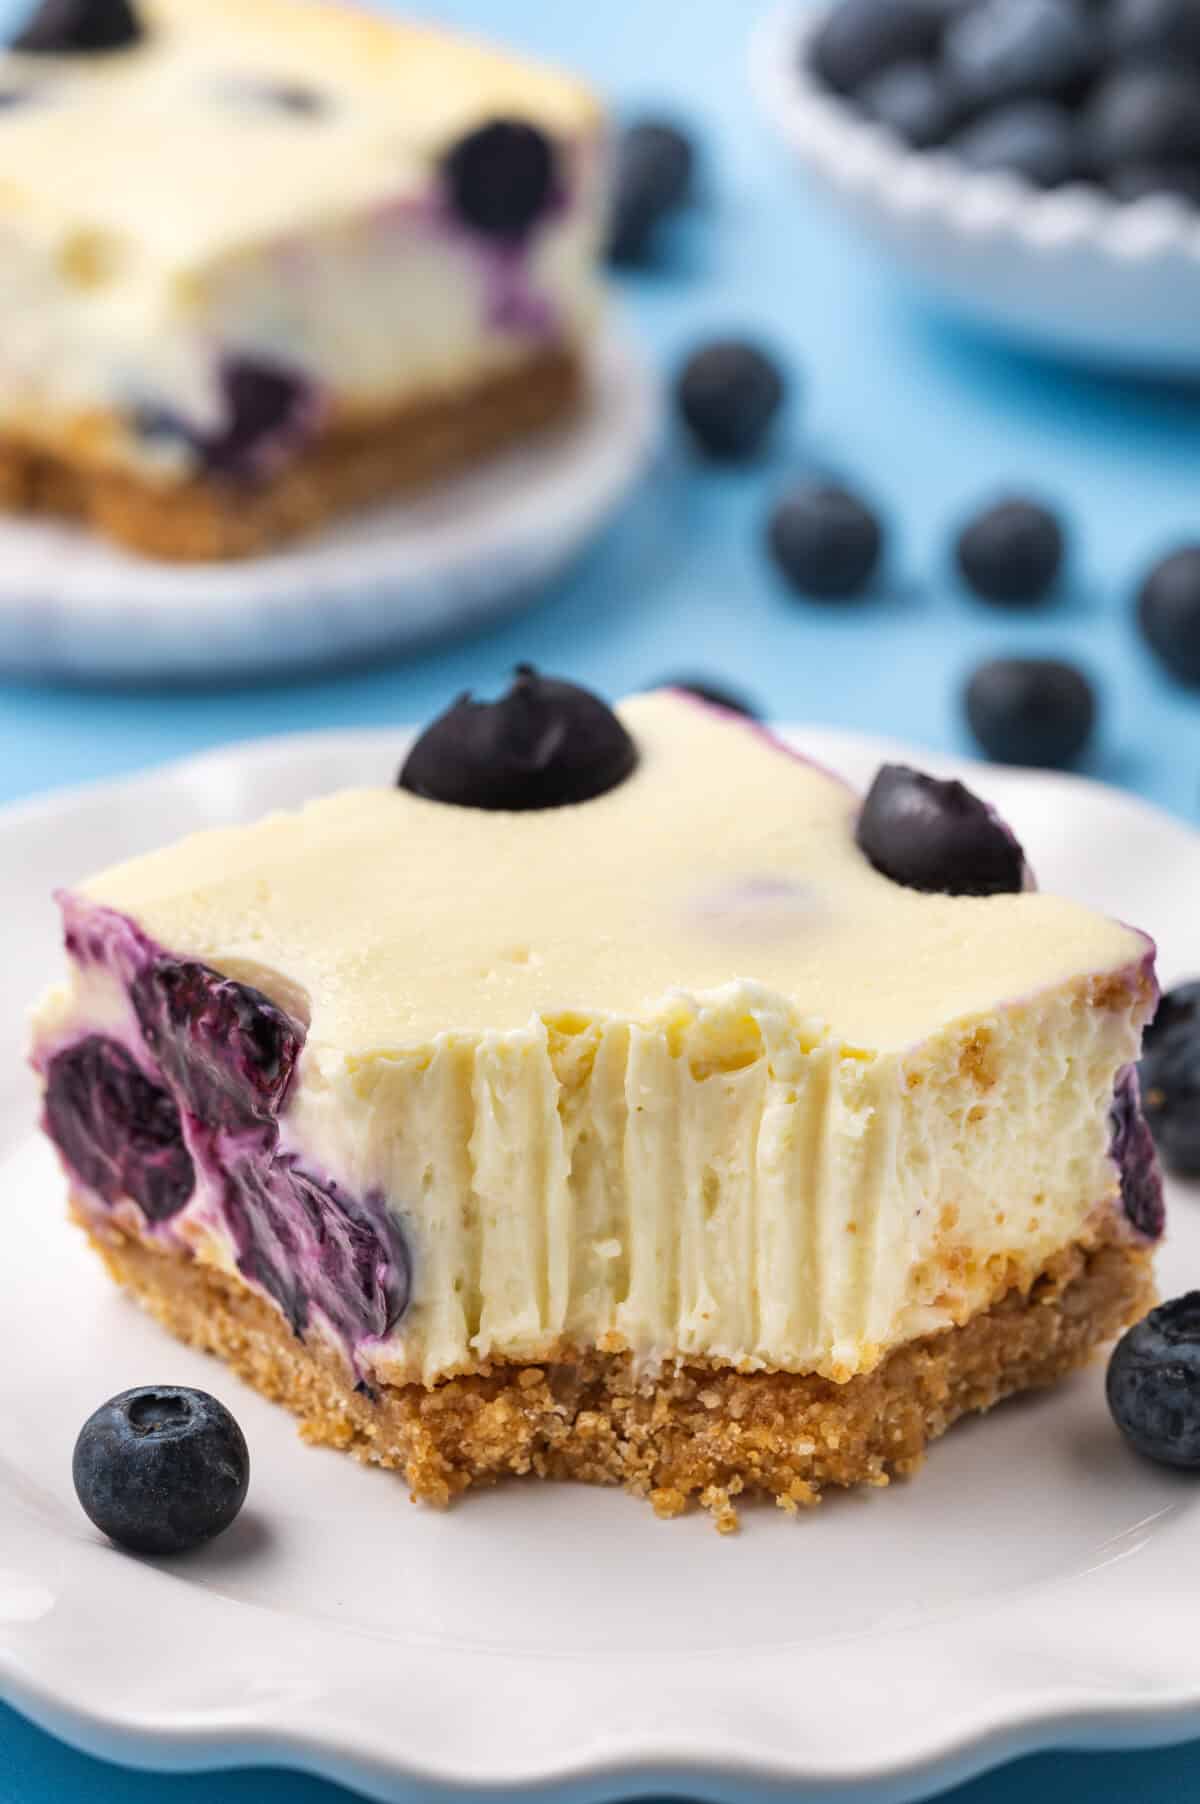 A blueberry cheesecake bar with a bite taken out of it sitting on a plate.